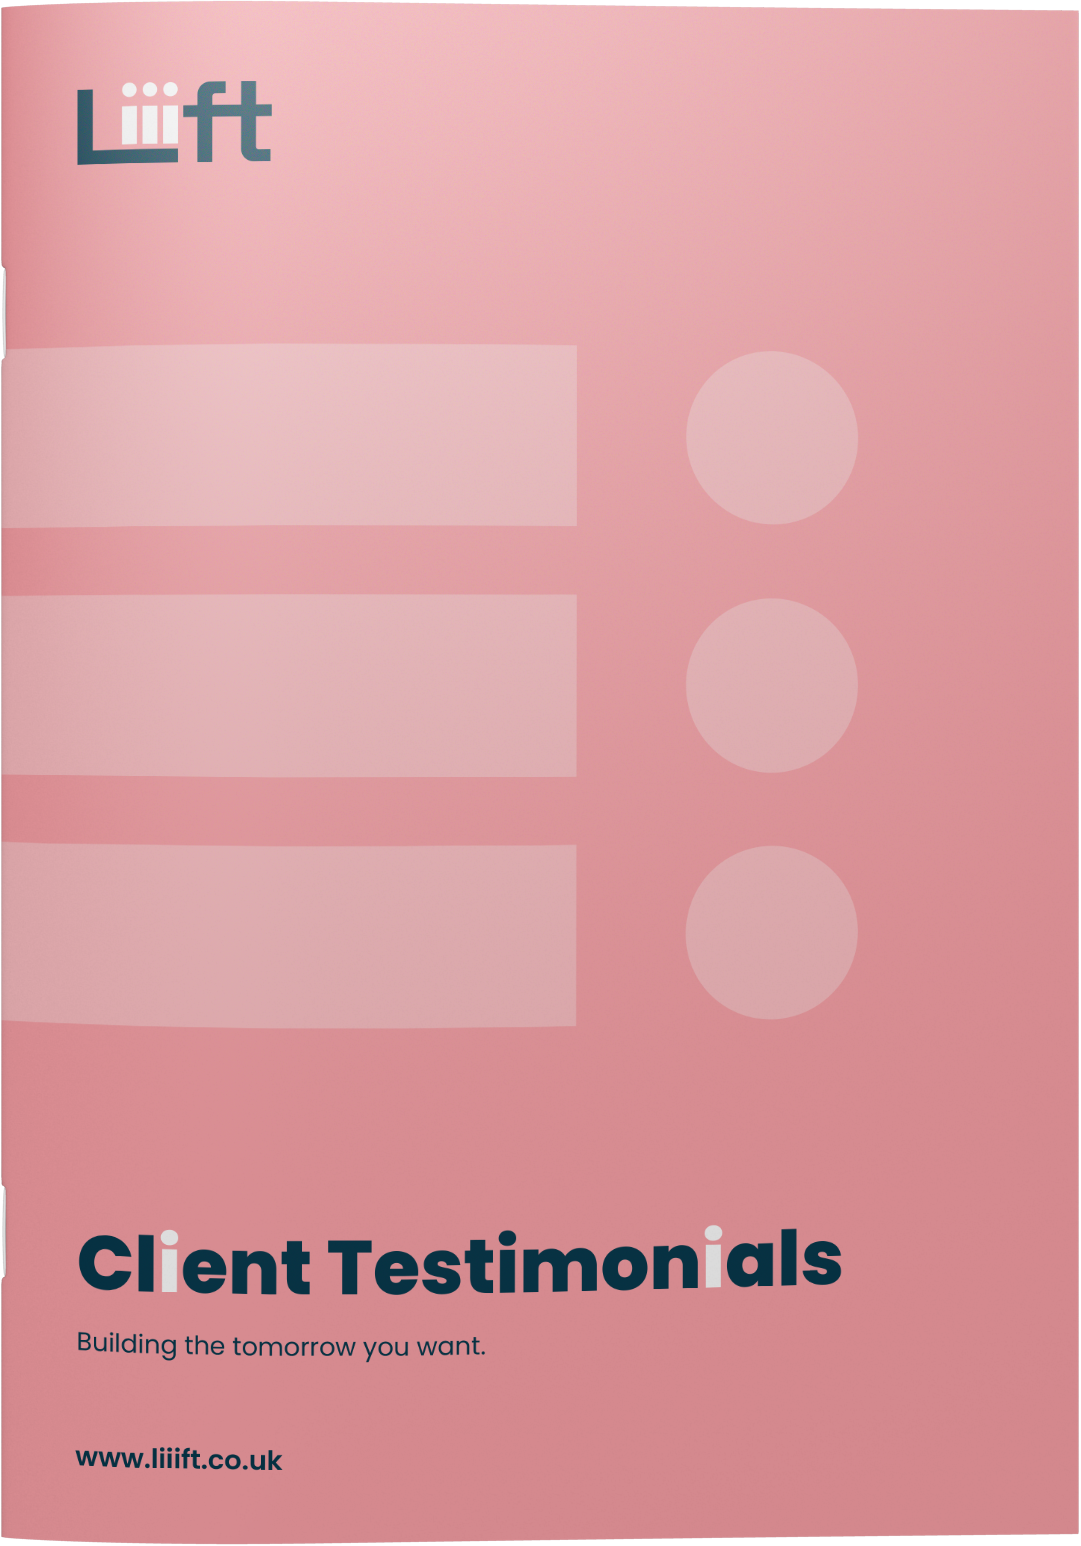 Image of the Liiift Client Testimonials which when clicked will open the PDF containing our Client Testimonials.